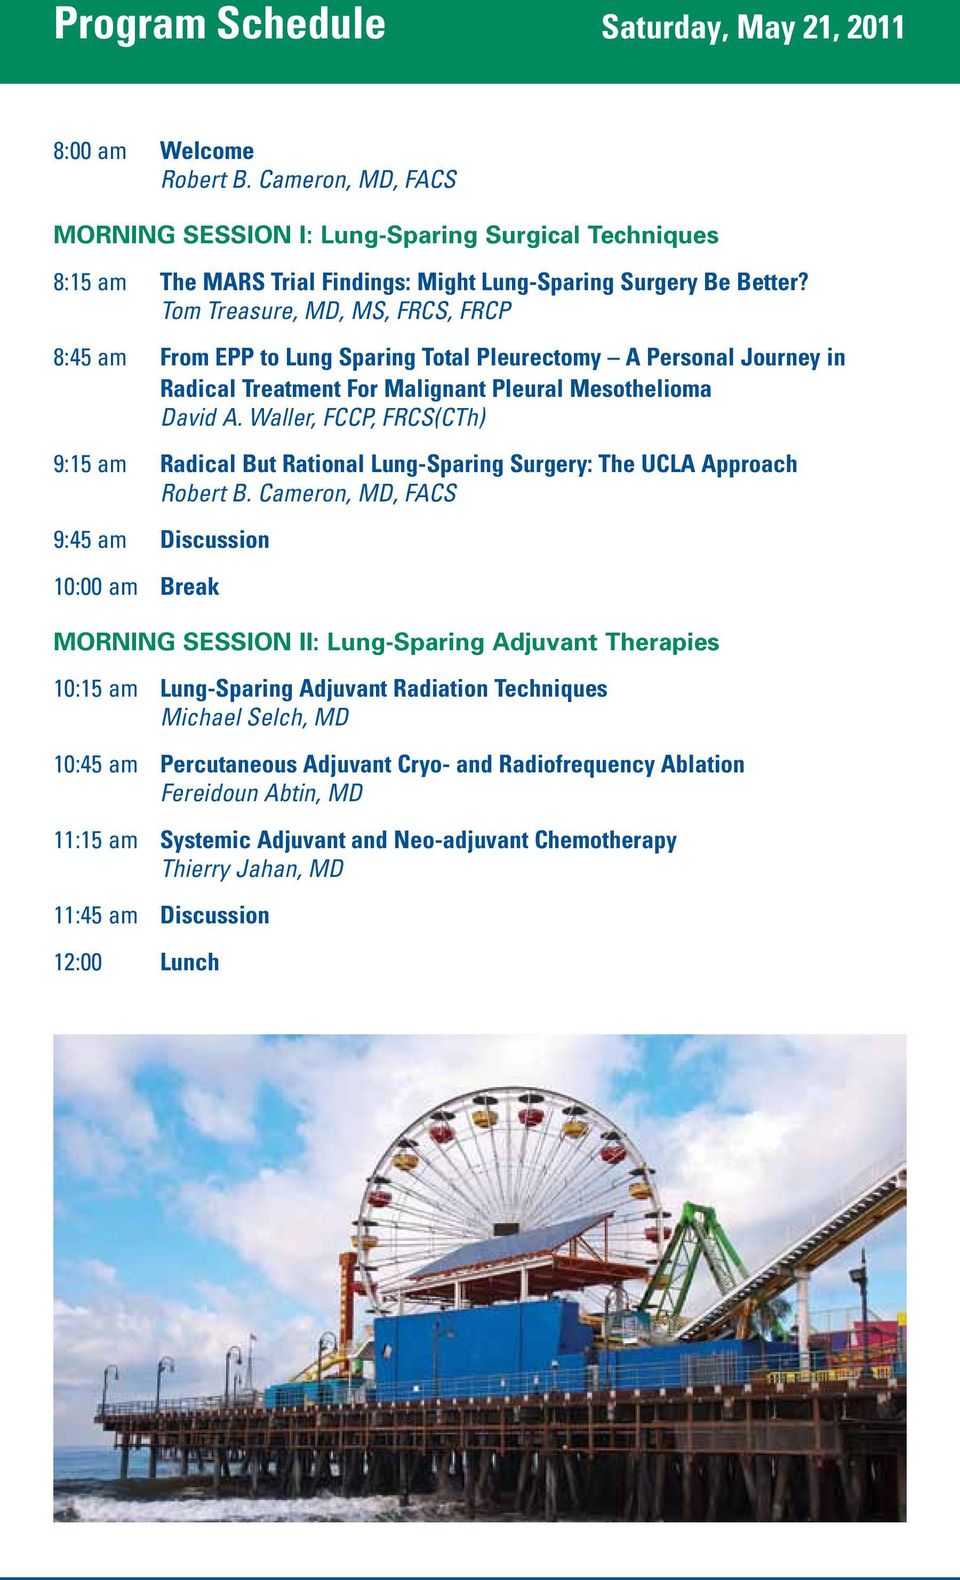 Waller, FCCP, FRCS(CTh) 9:15 am Radical But Rational Lung-Sparing Surgery: The UCLA Approach 9:45 am Discussion 10:00 am Break MORNING SESSION II: Lung-Sparing Adjuvant Therapies 10:15 am